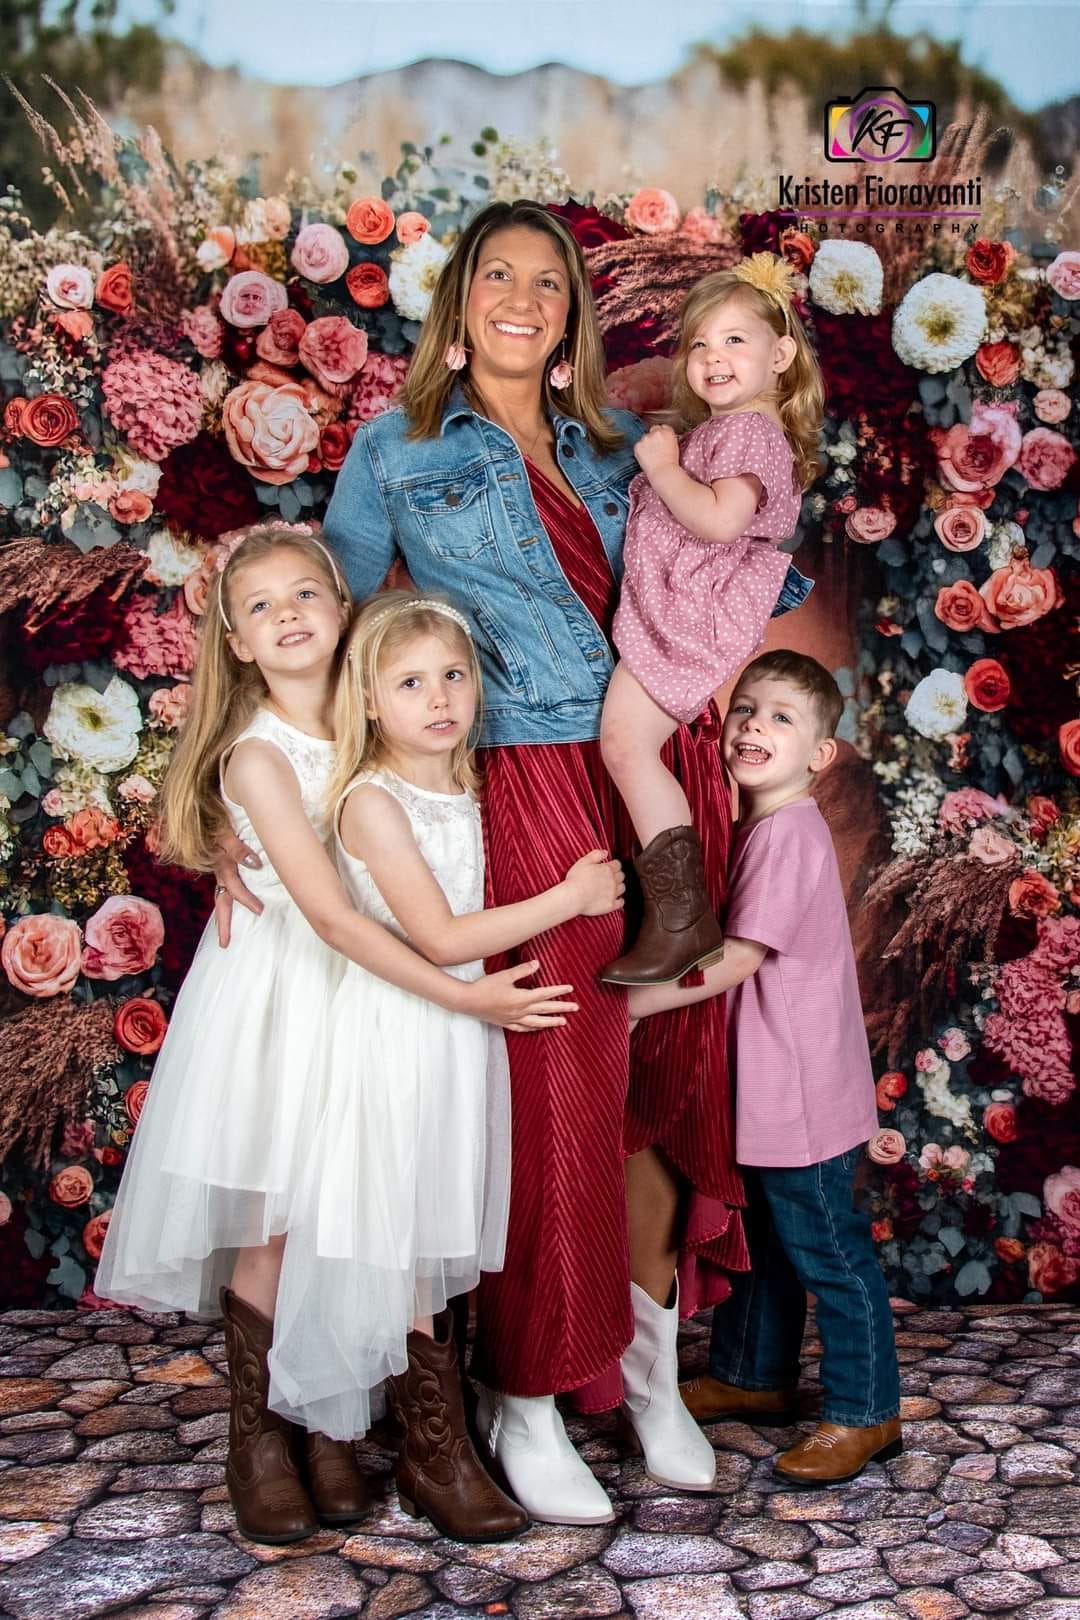 Kate Painted Boho Free Spirit Backdrop Outside Floral Designed by Mini MakeBelieve